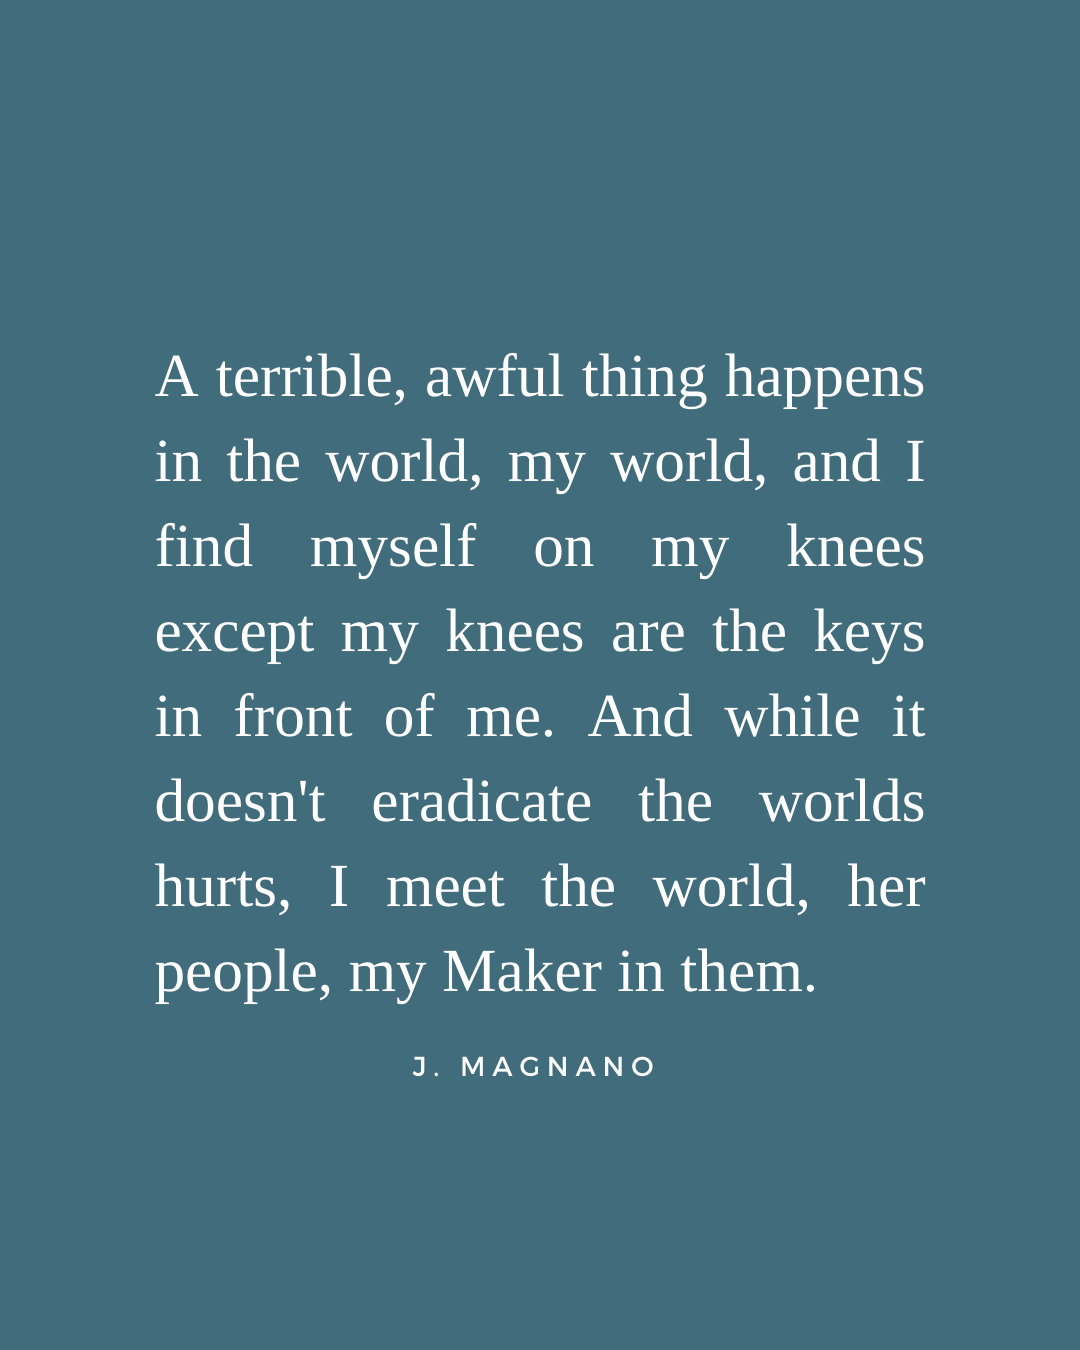 A terrible, awful thing happens in the world, my world, and I find myself on my knees except my knees are the keys in front of me. And while it (writing) doesn't eradicate the worlds hurts, I meet the world, her people, my Maker in them.